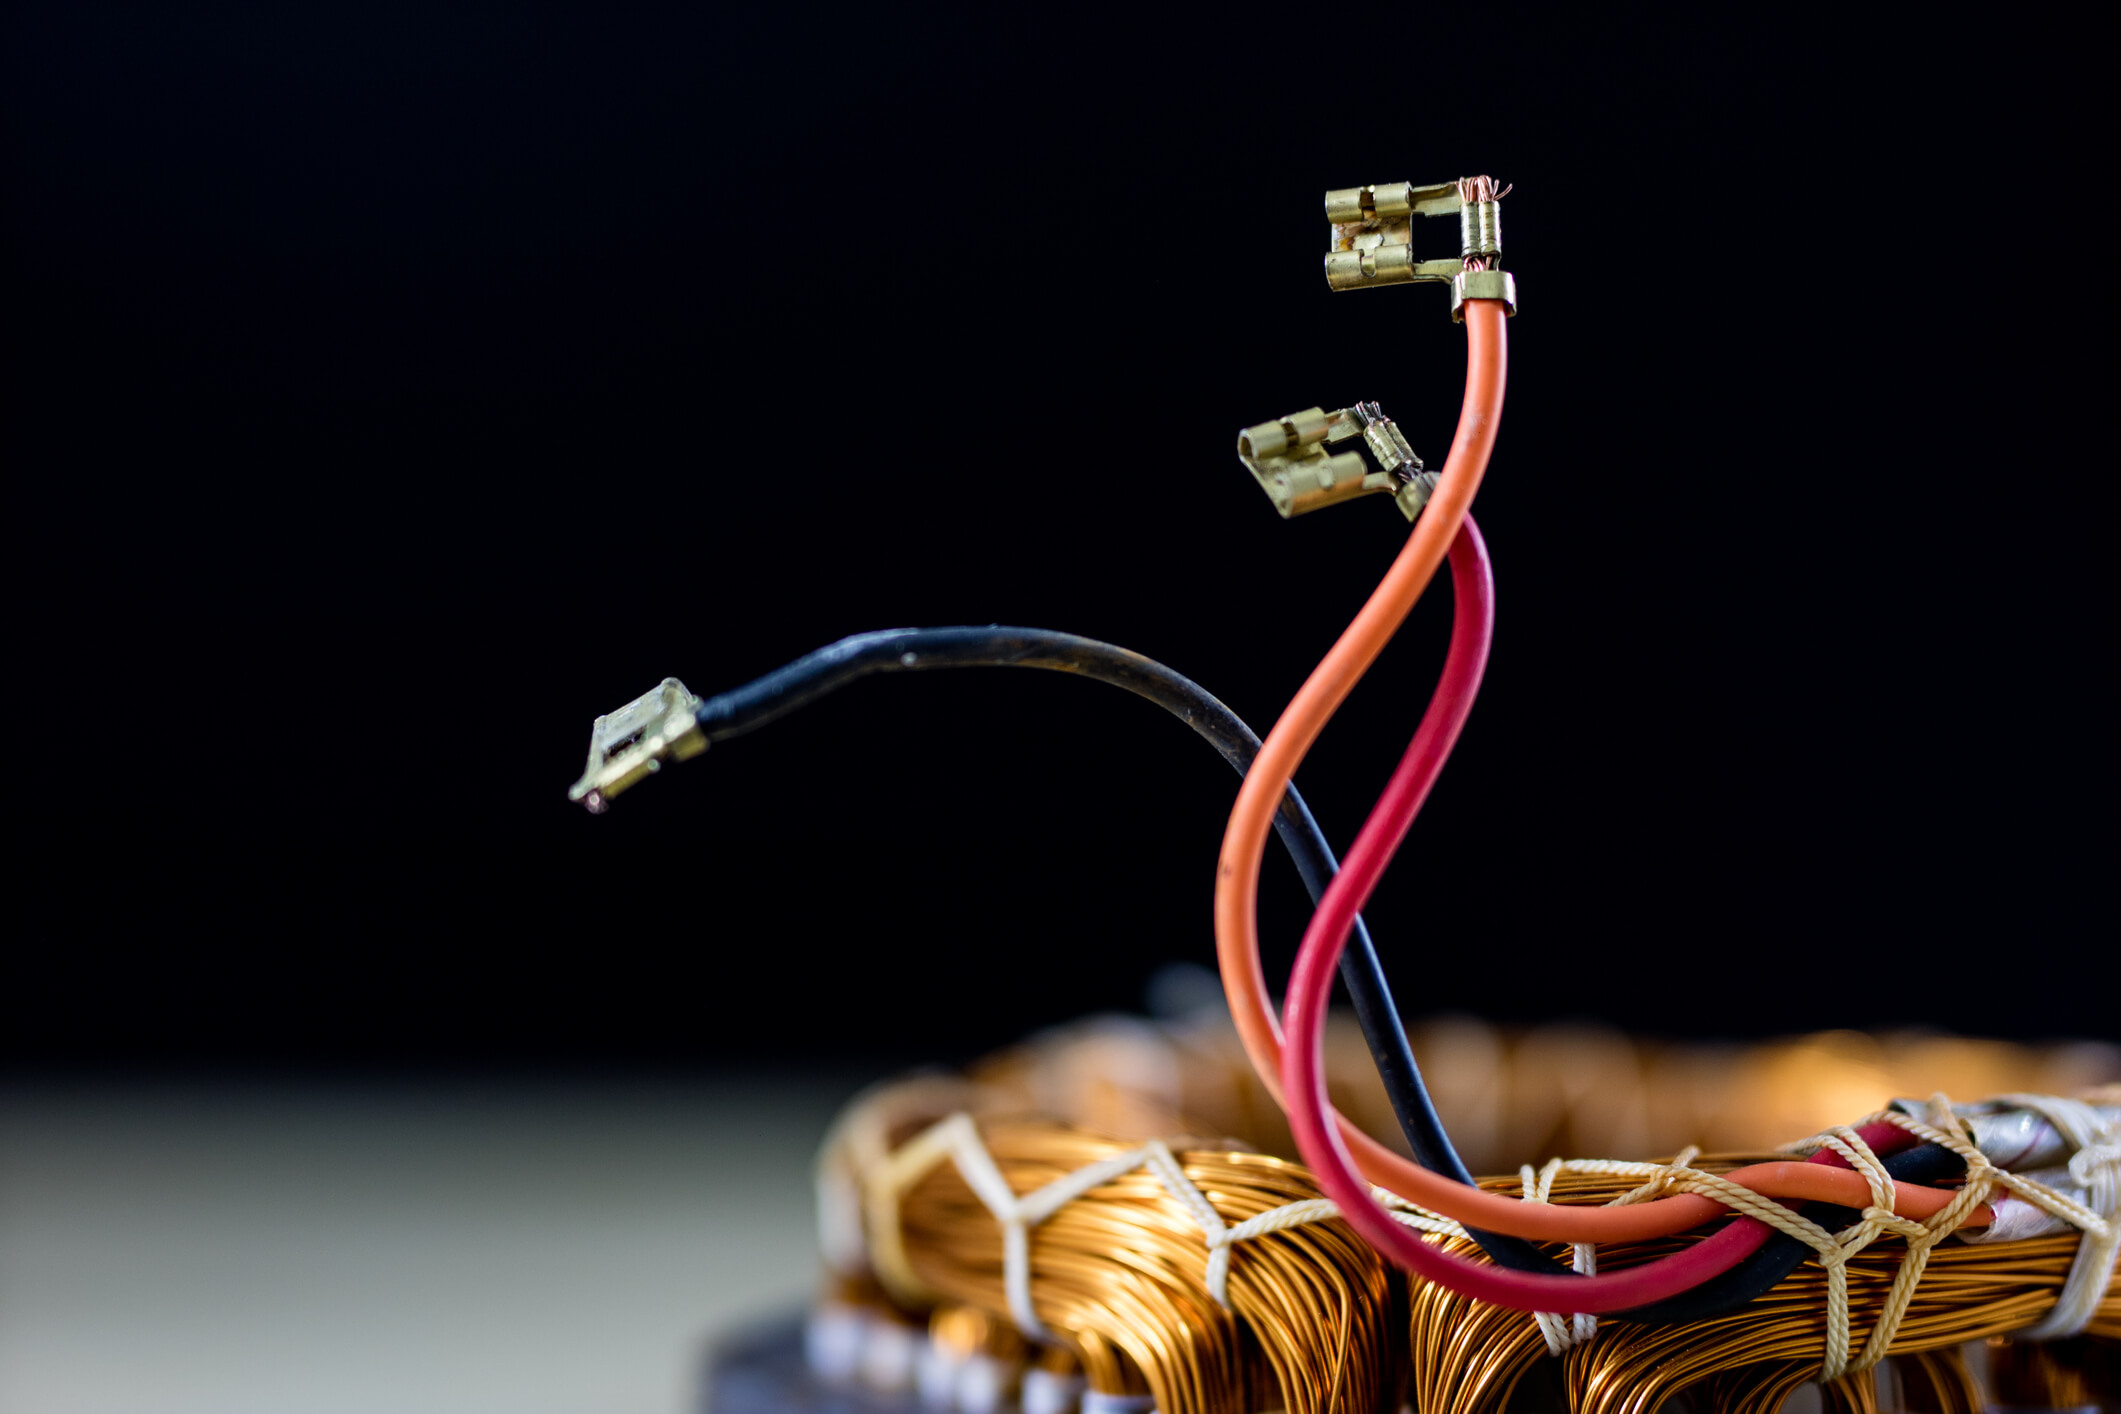 How Does a Flyback Transformer Work?